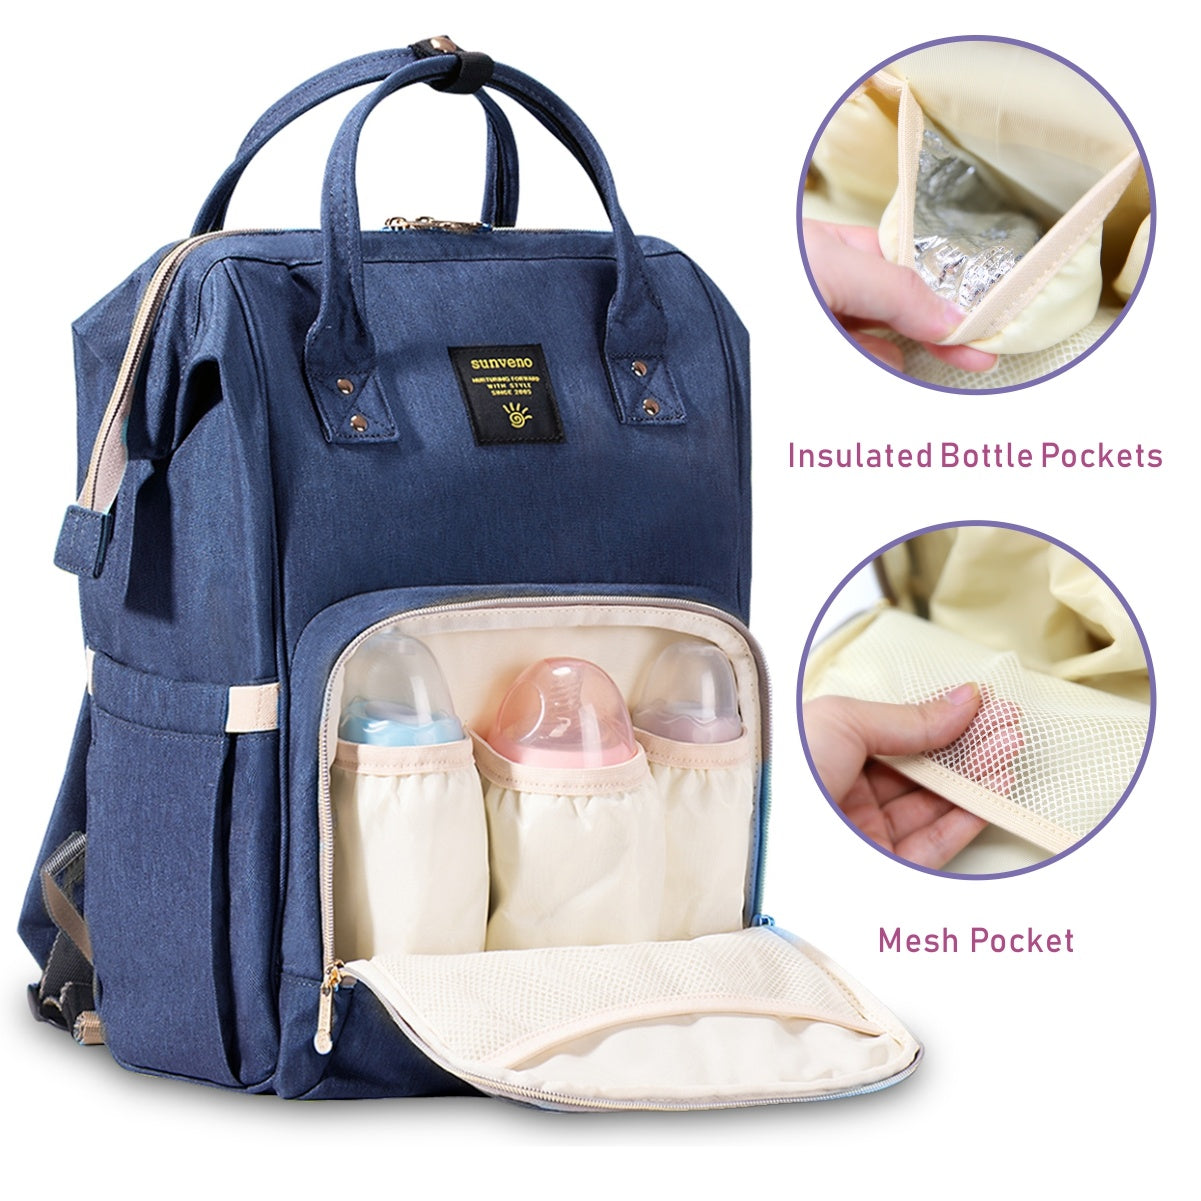 This Sunveno Original Diaper Bag Travel Baby Bags Navy Blue Mommy Backpack Organizer Nappy Maternity Bag Mother Kids, with gold zippers, features an external USB charging port connected to a smartphone for convenient on-the-go charging. Perfect for those who value both style and functionality in their accessories.